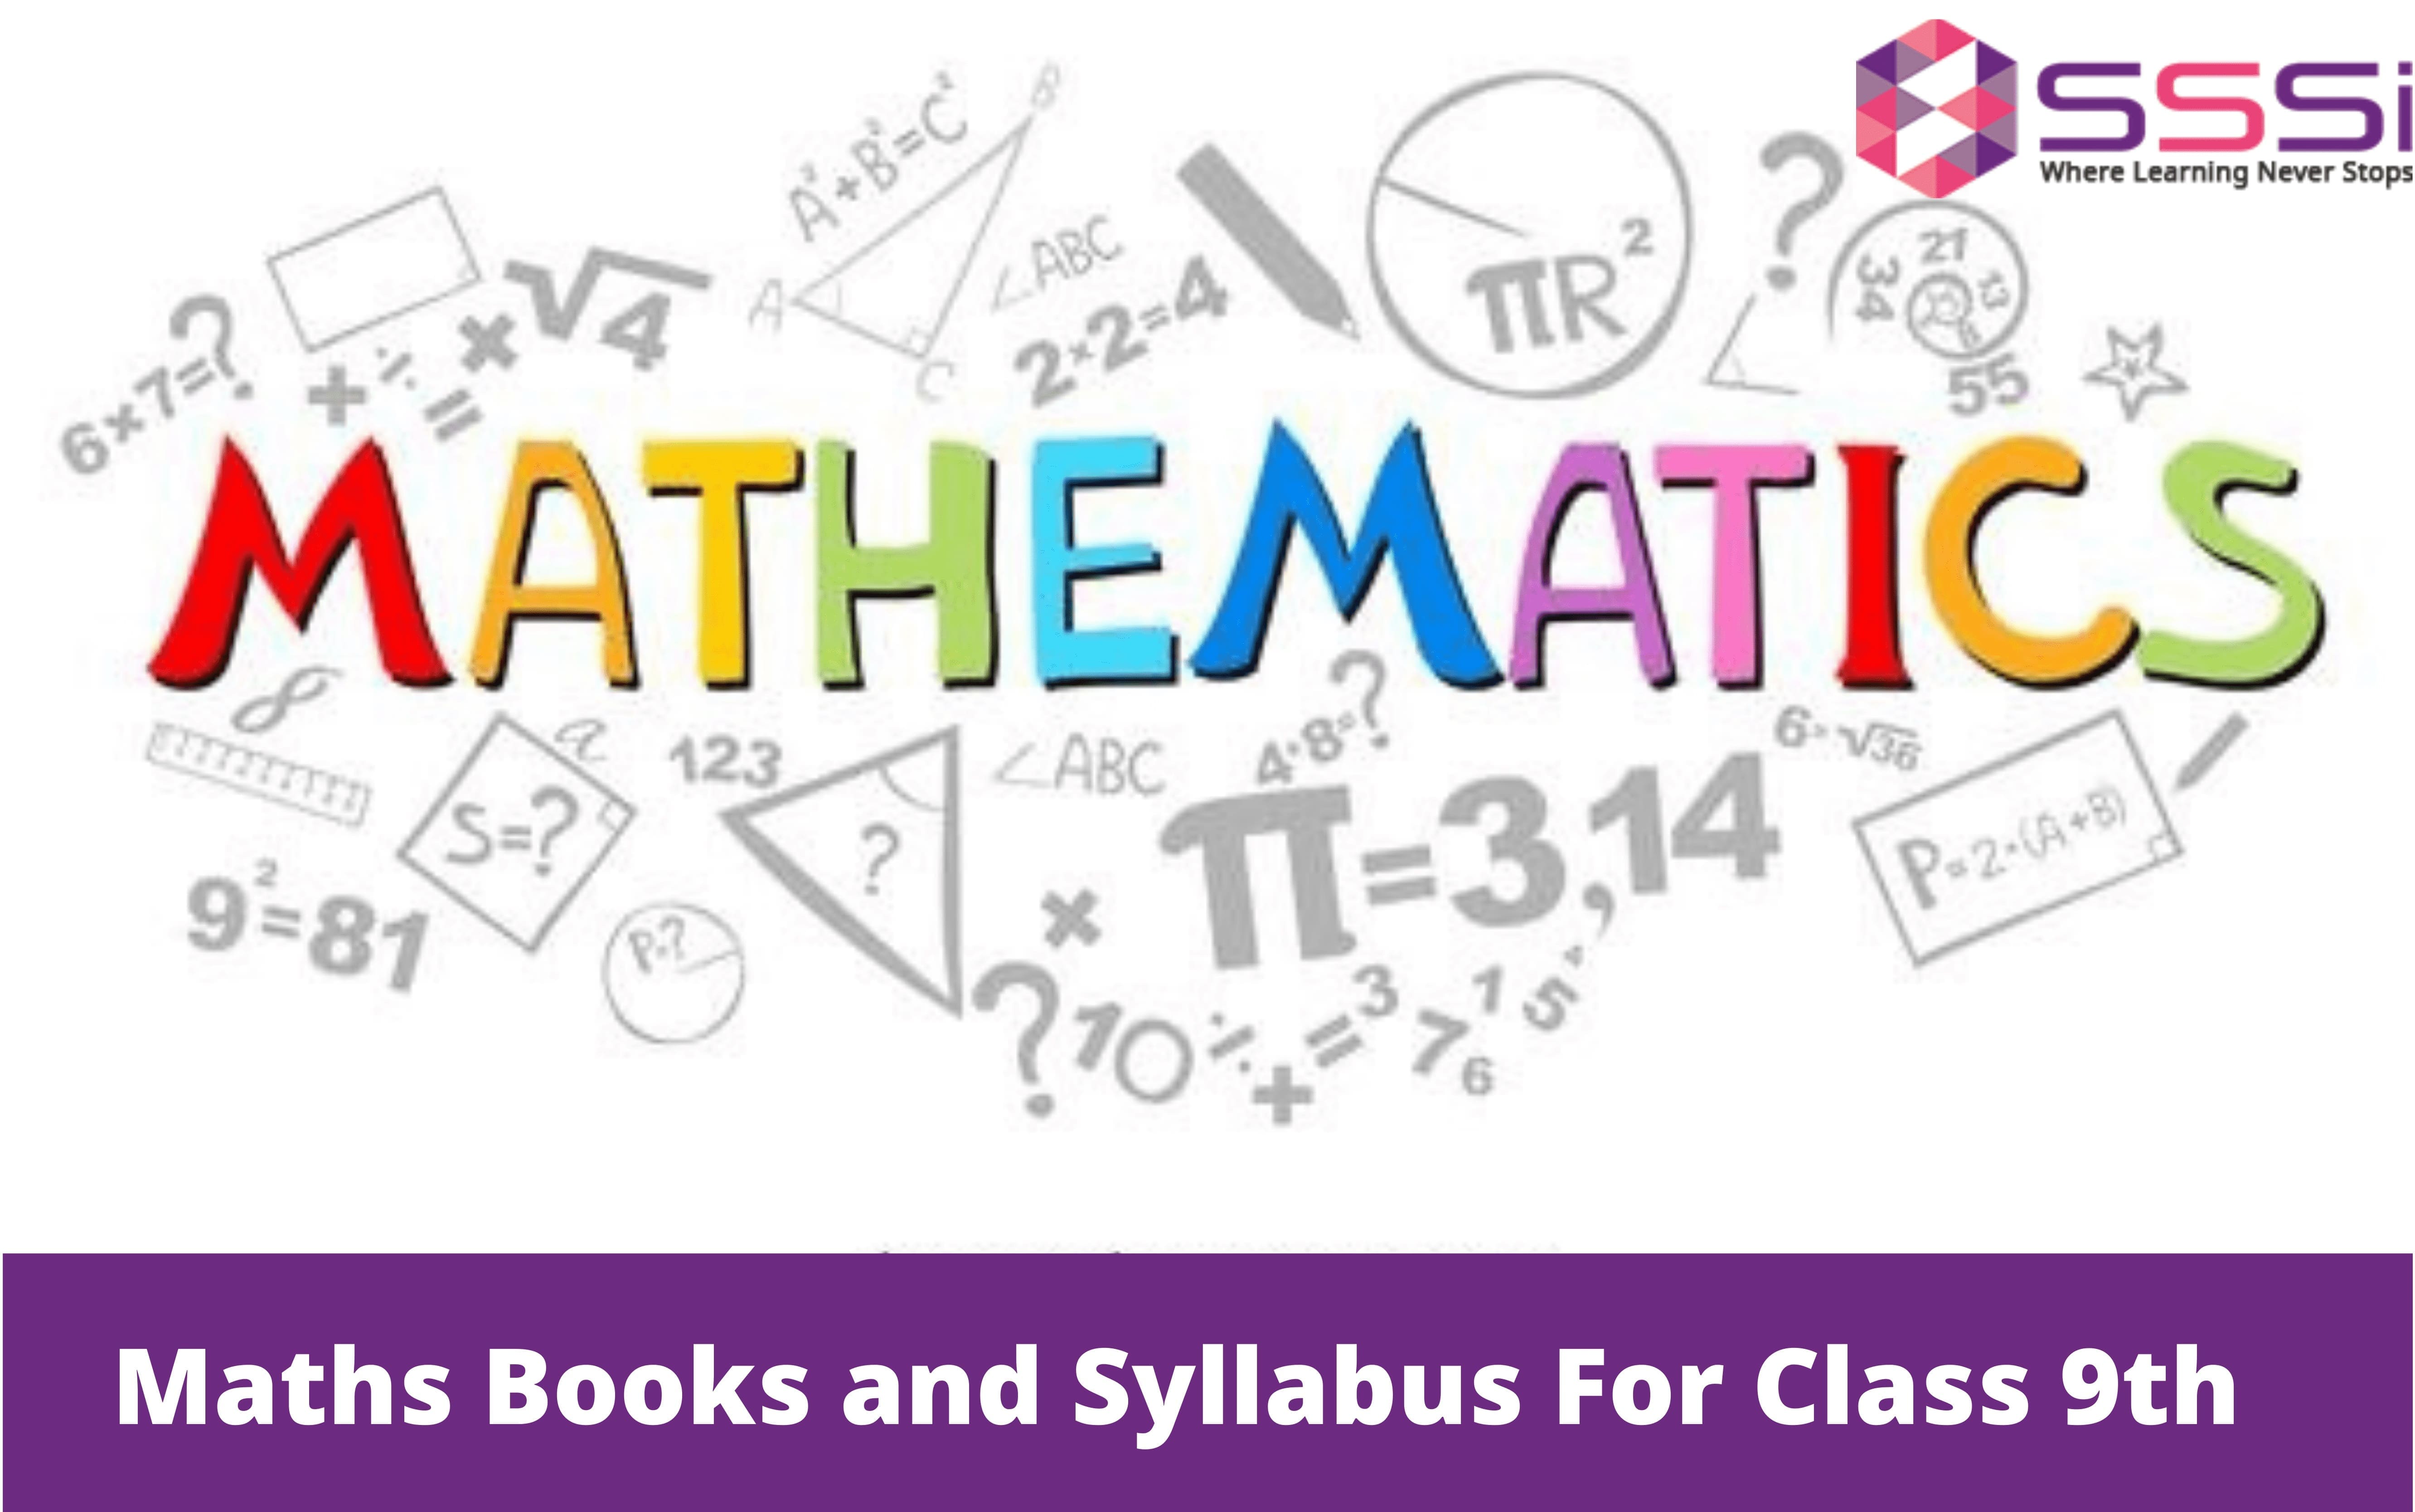 Maths Books and Syllabus For Class 9th